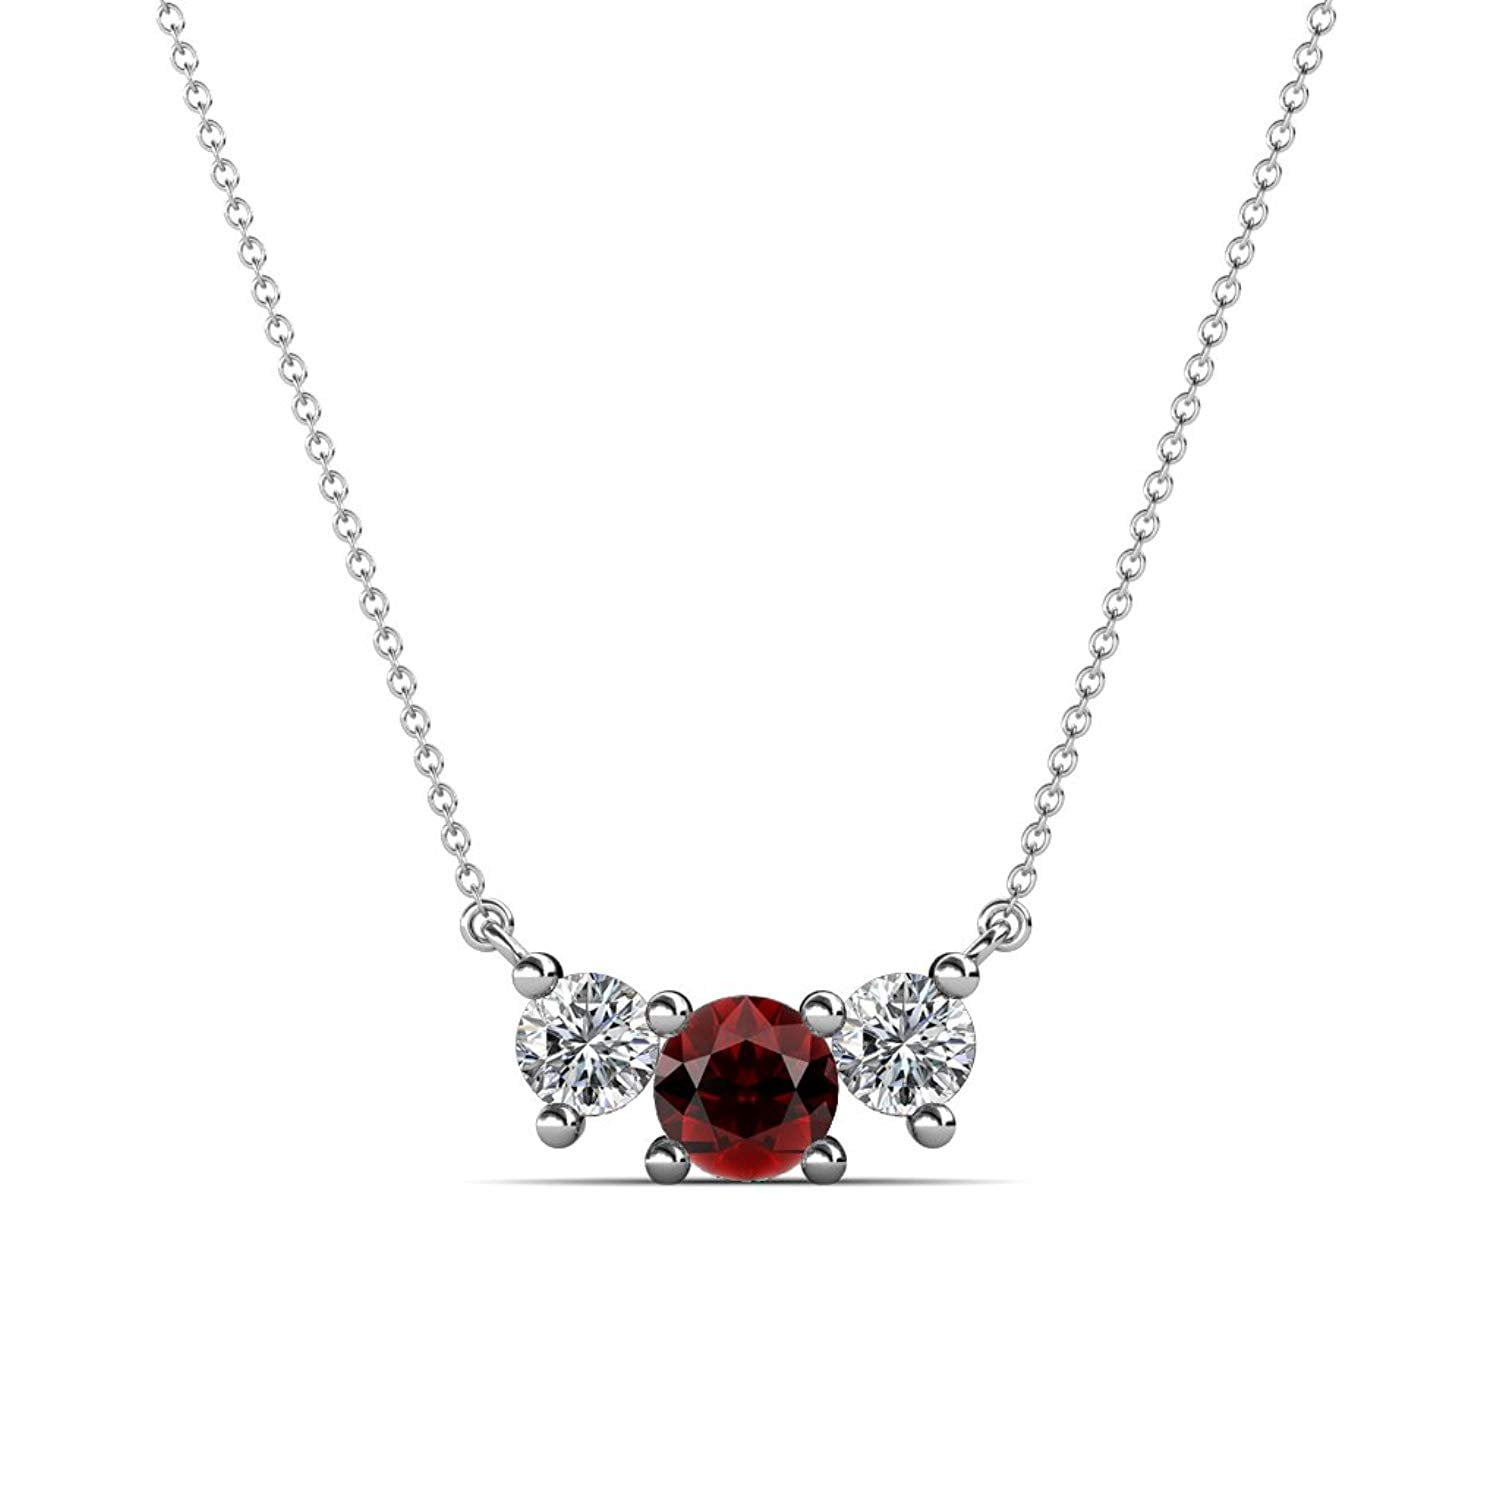 Details about   Red Garnet 1/2 ctw Graduated 3 Stone Pendant 14K Gold 16 Inches Chain JP:181949 